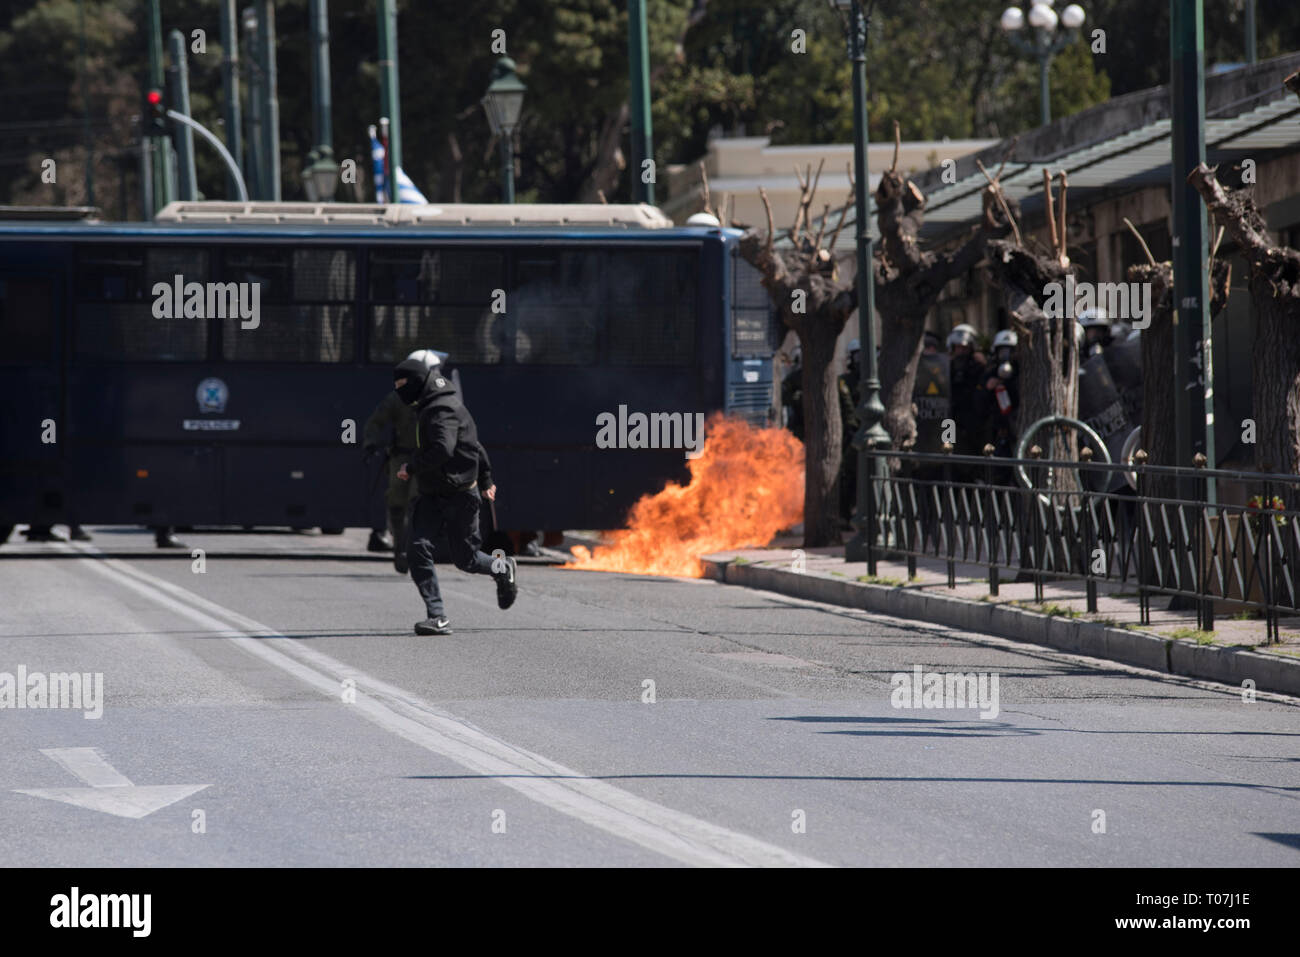 A protester from the black block hurls a petrol bomb at riot police. A few thousands high school students took to the streets to demonstrate against upcoming reforms in education, which they claim will drive them to seek for paid supplementary education putting an additional financial burden to their parents.© Nikolas Georgiou / Alamy Live News Stock Photo